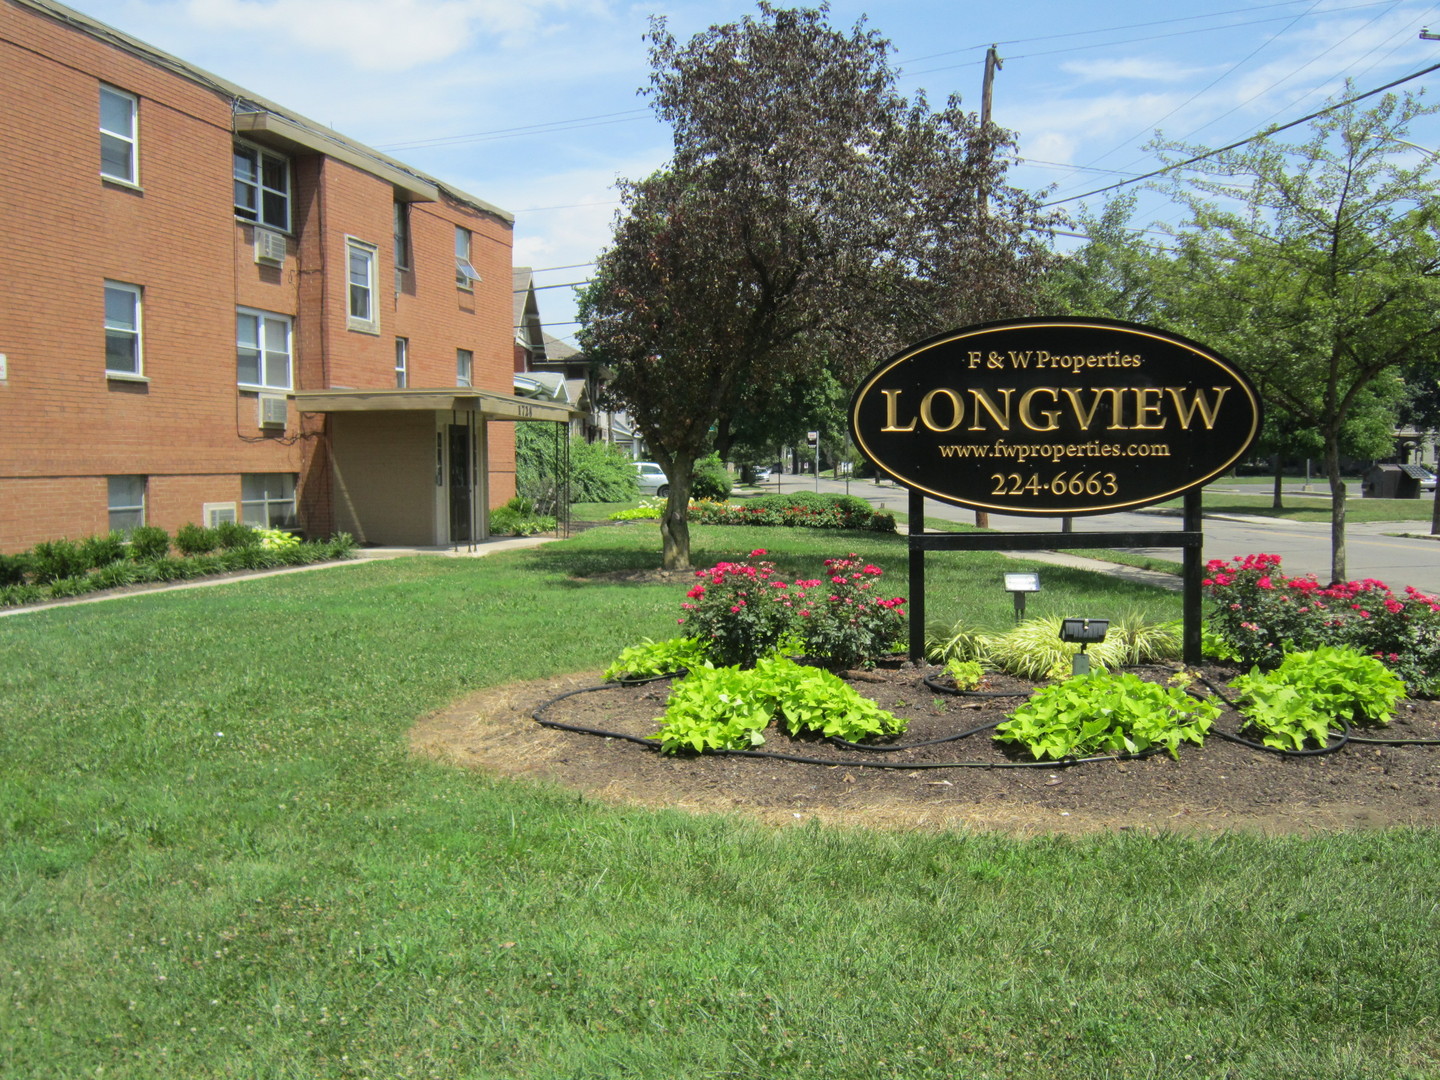 LONG VIEW APARTMENTS